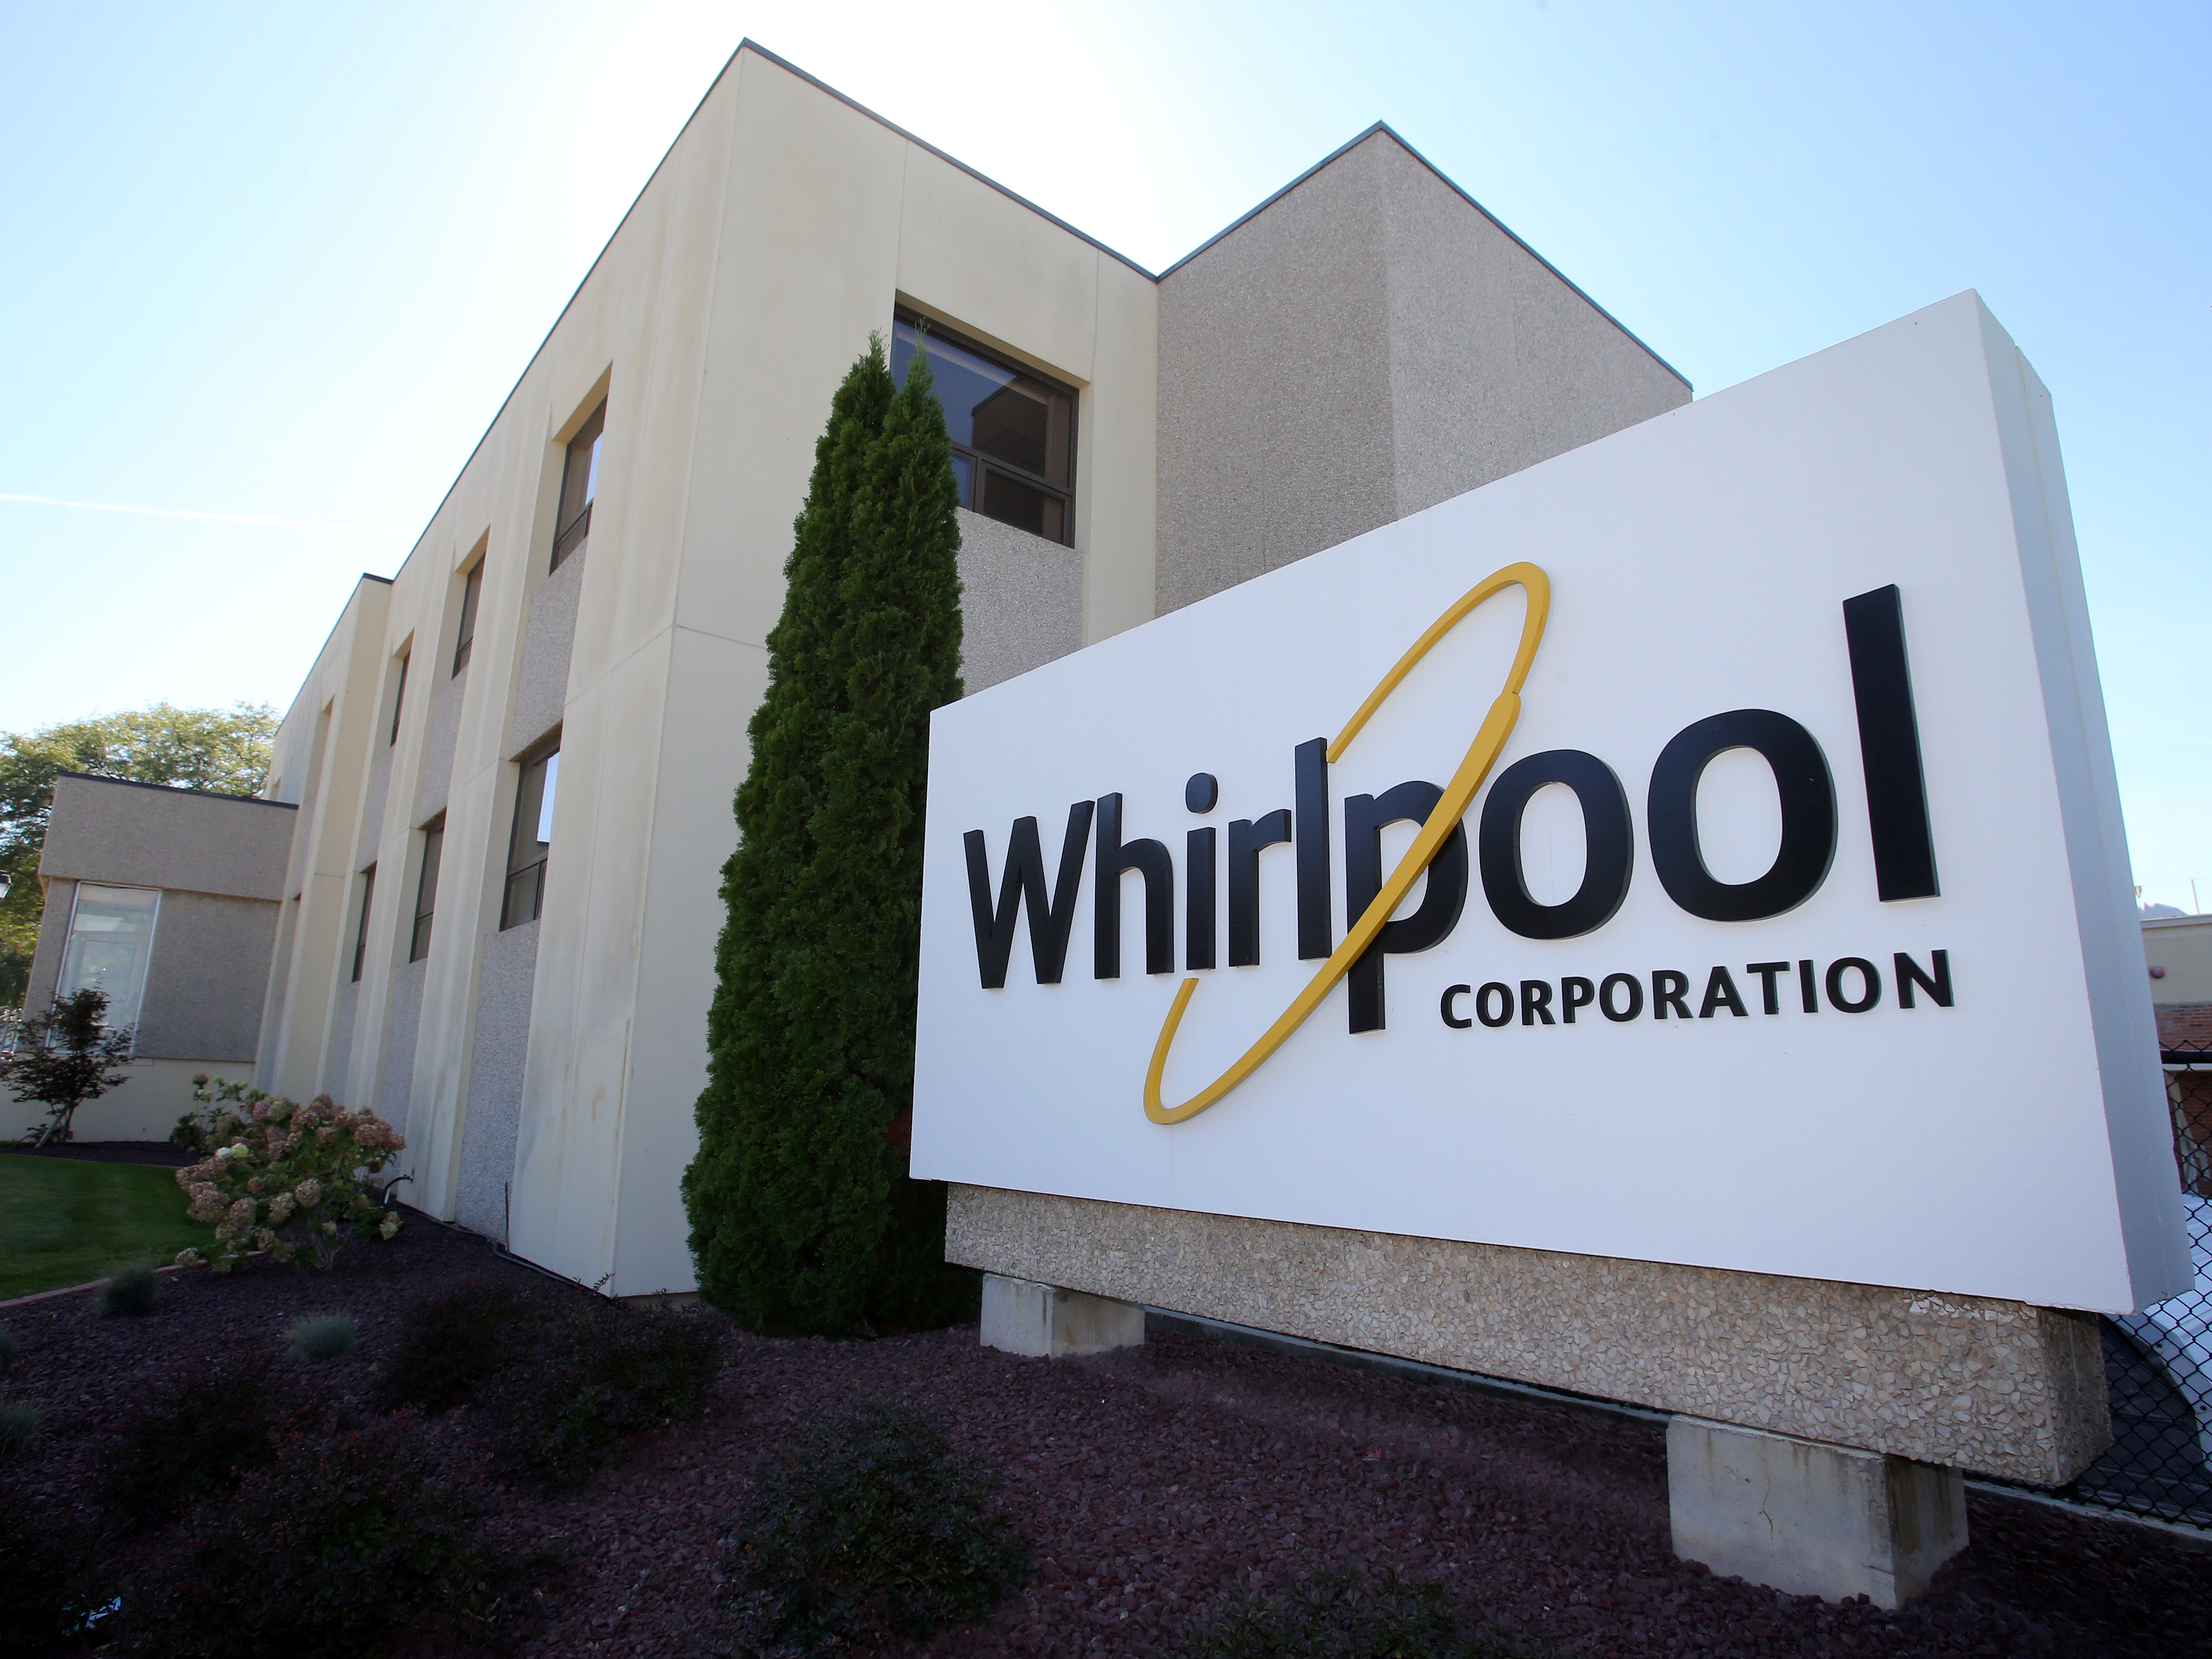 The administrative entrance at the Whirlpool plant in Clyde Ohio